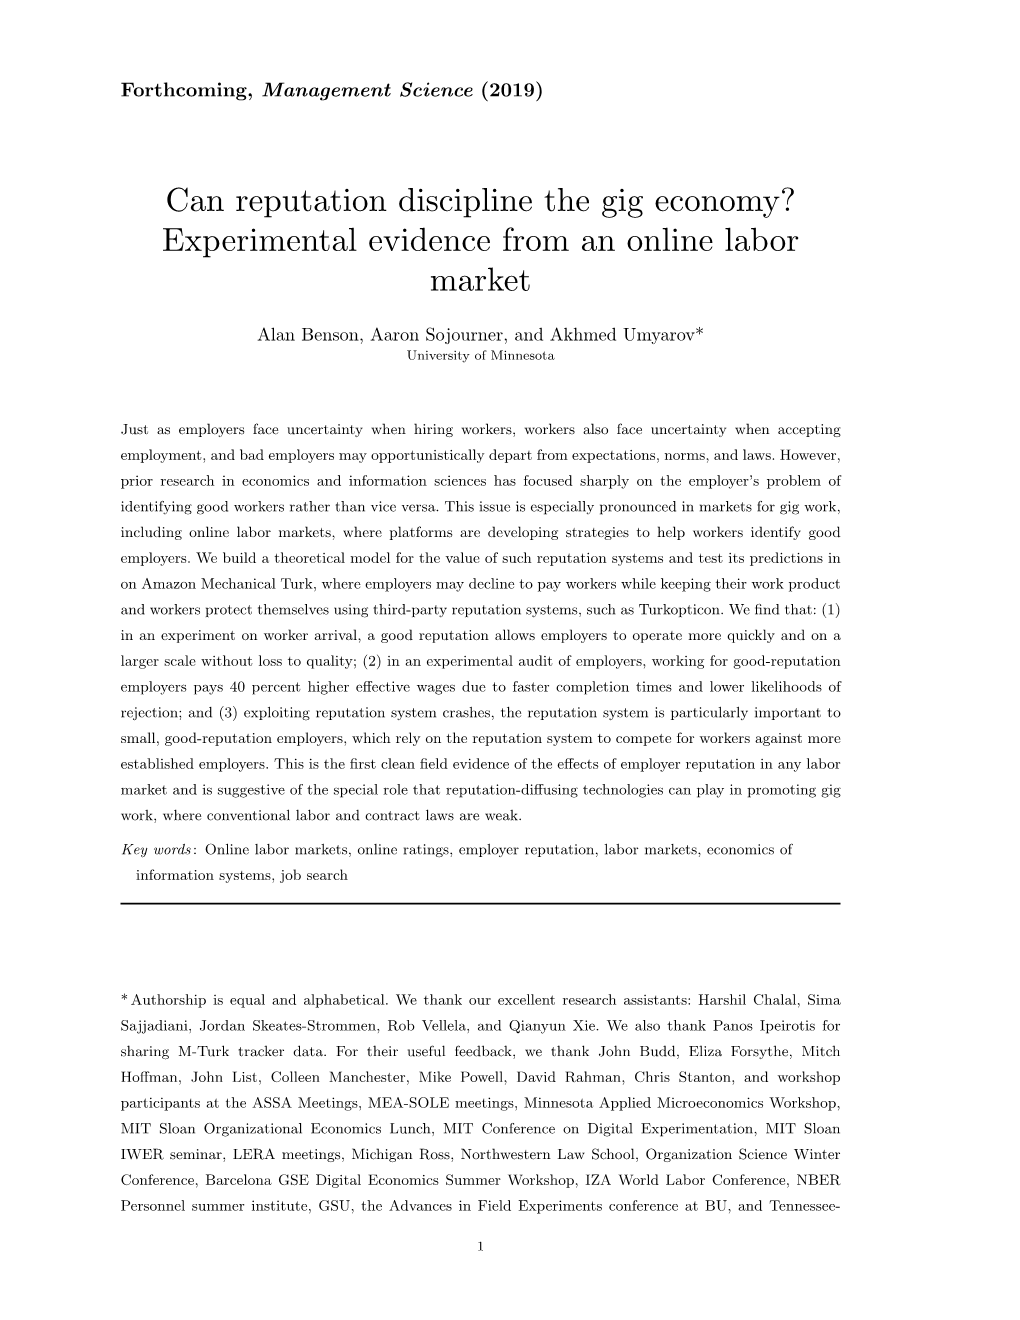 Can Reputation Discipline the Gig Economy? Experimental Evidence from an Online Labor Market